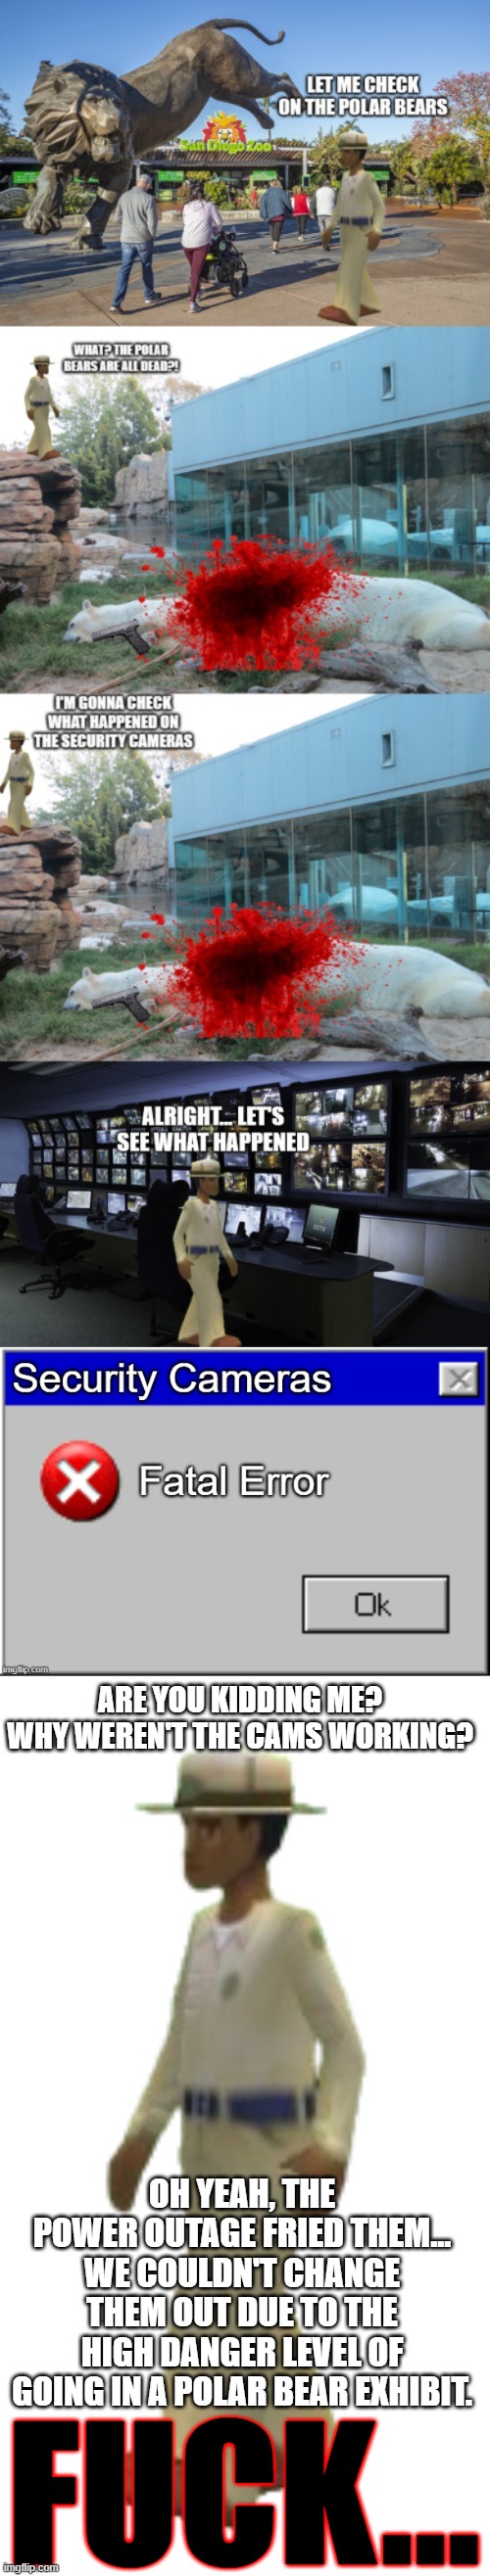 Fatal Error | ARE YOU KIDDING ME? WHY WEREN'T THE CAMS WORKING? OH YEAH, THE POWER OUTAGE FRIED THEM... WE COULDN'T CHANGE THEM OUT DUE TO THE HIGH DANGER LEVEL OF GOING IN A POLAR BEAR EXHIBIT. FUCK... | image tagged in zookeeper zoo tycoon 2 | made w/ Imgflip meme maker